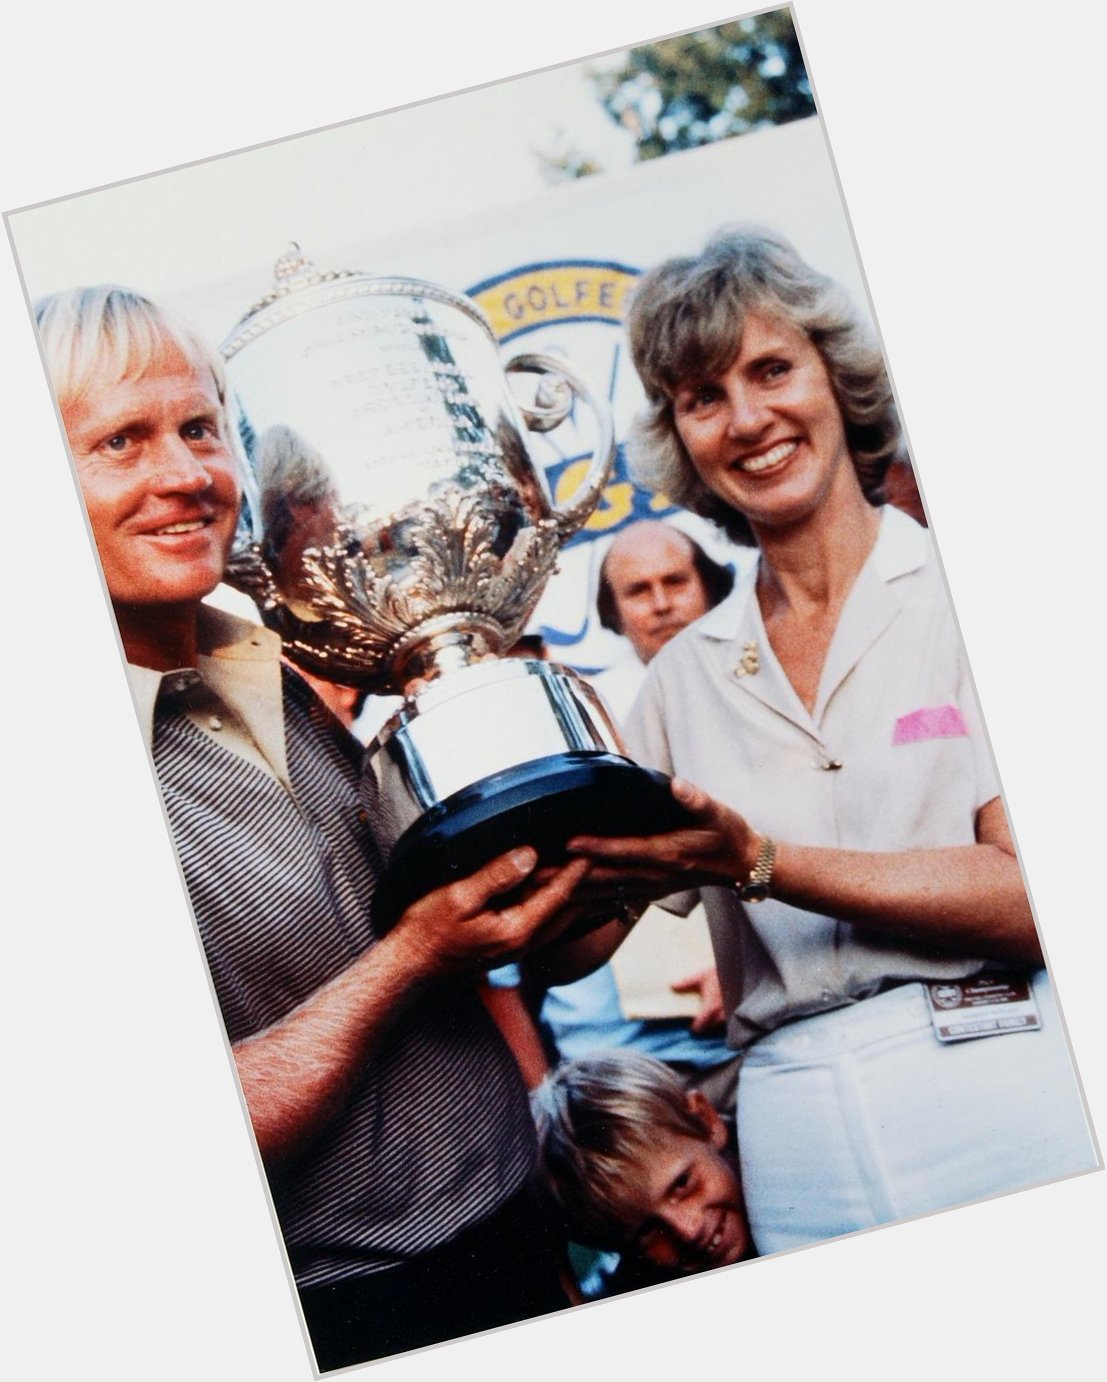   Happy 75th Birthday to five-time Jack Nicklaus. 